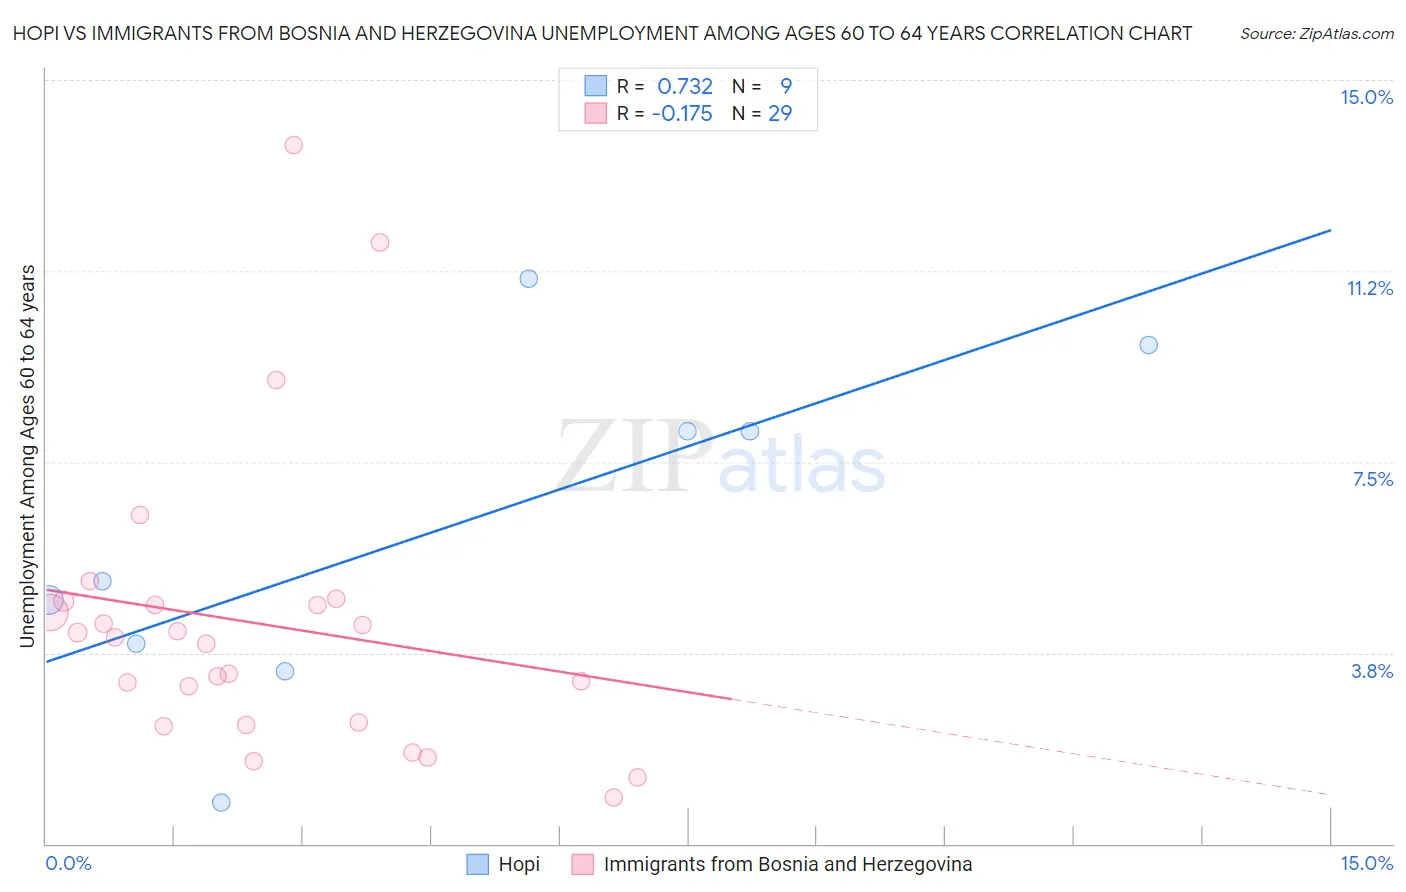 Hopi vs Immigrants from Bosnia and Herzegovina Unemployment Among Ages 60 to 64 years